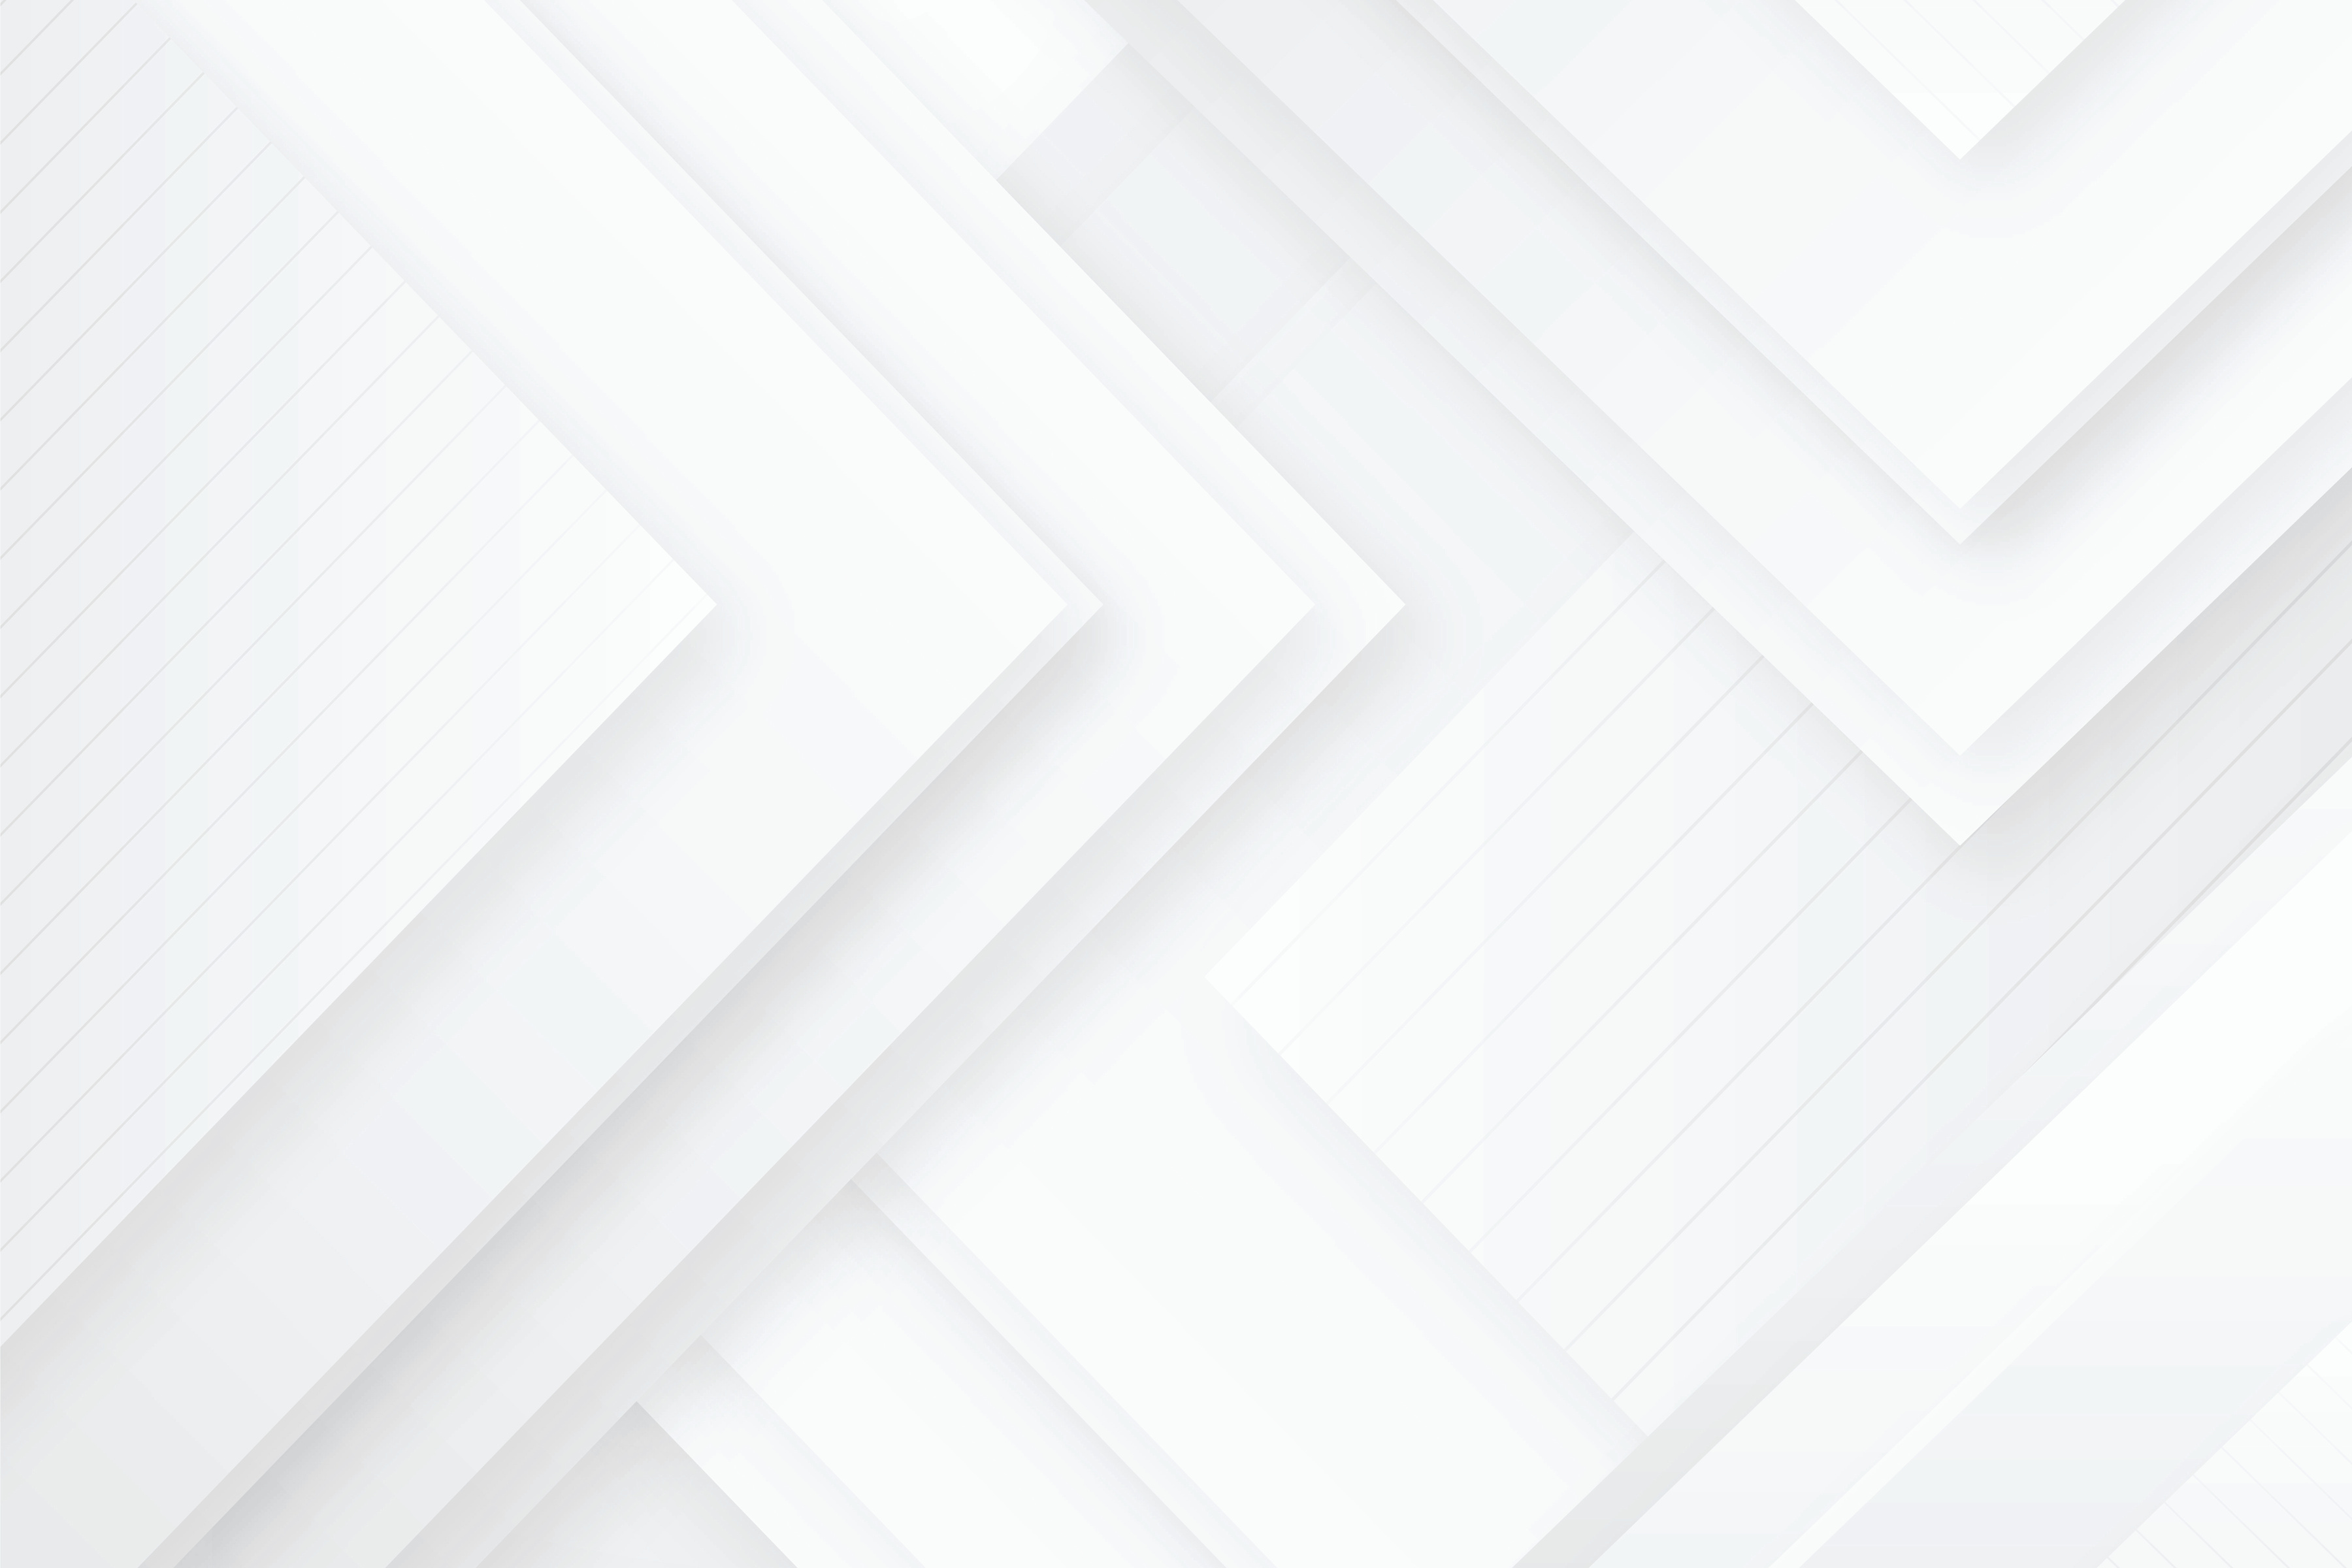 3D White Abstracts Background Stock Photo